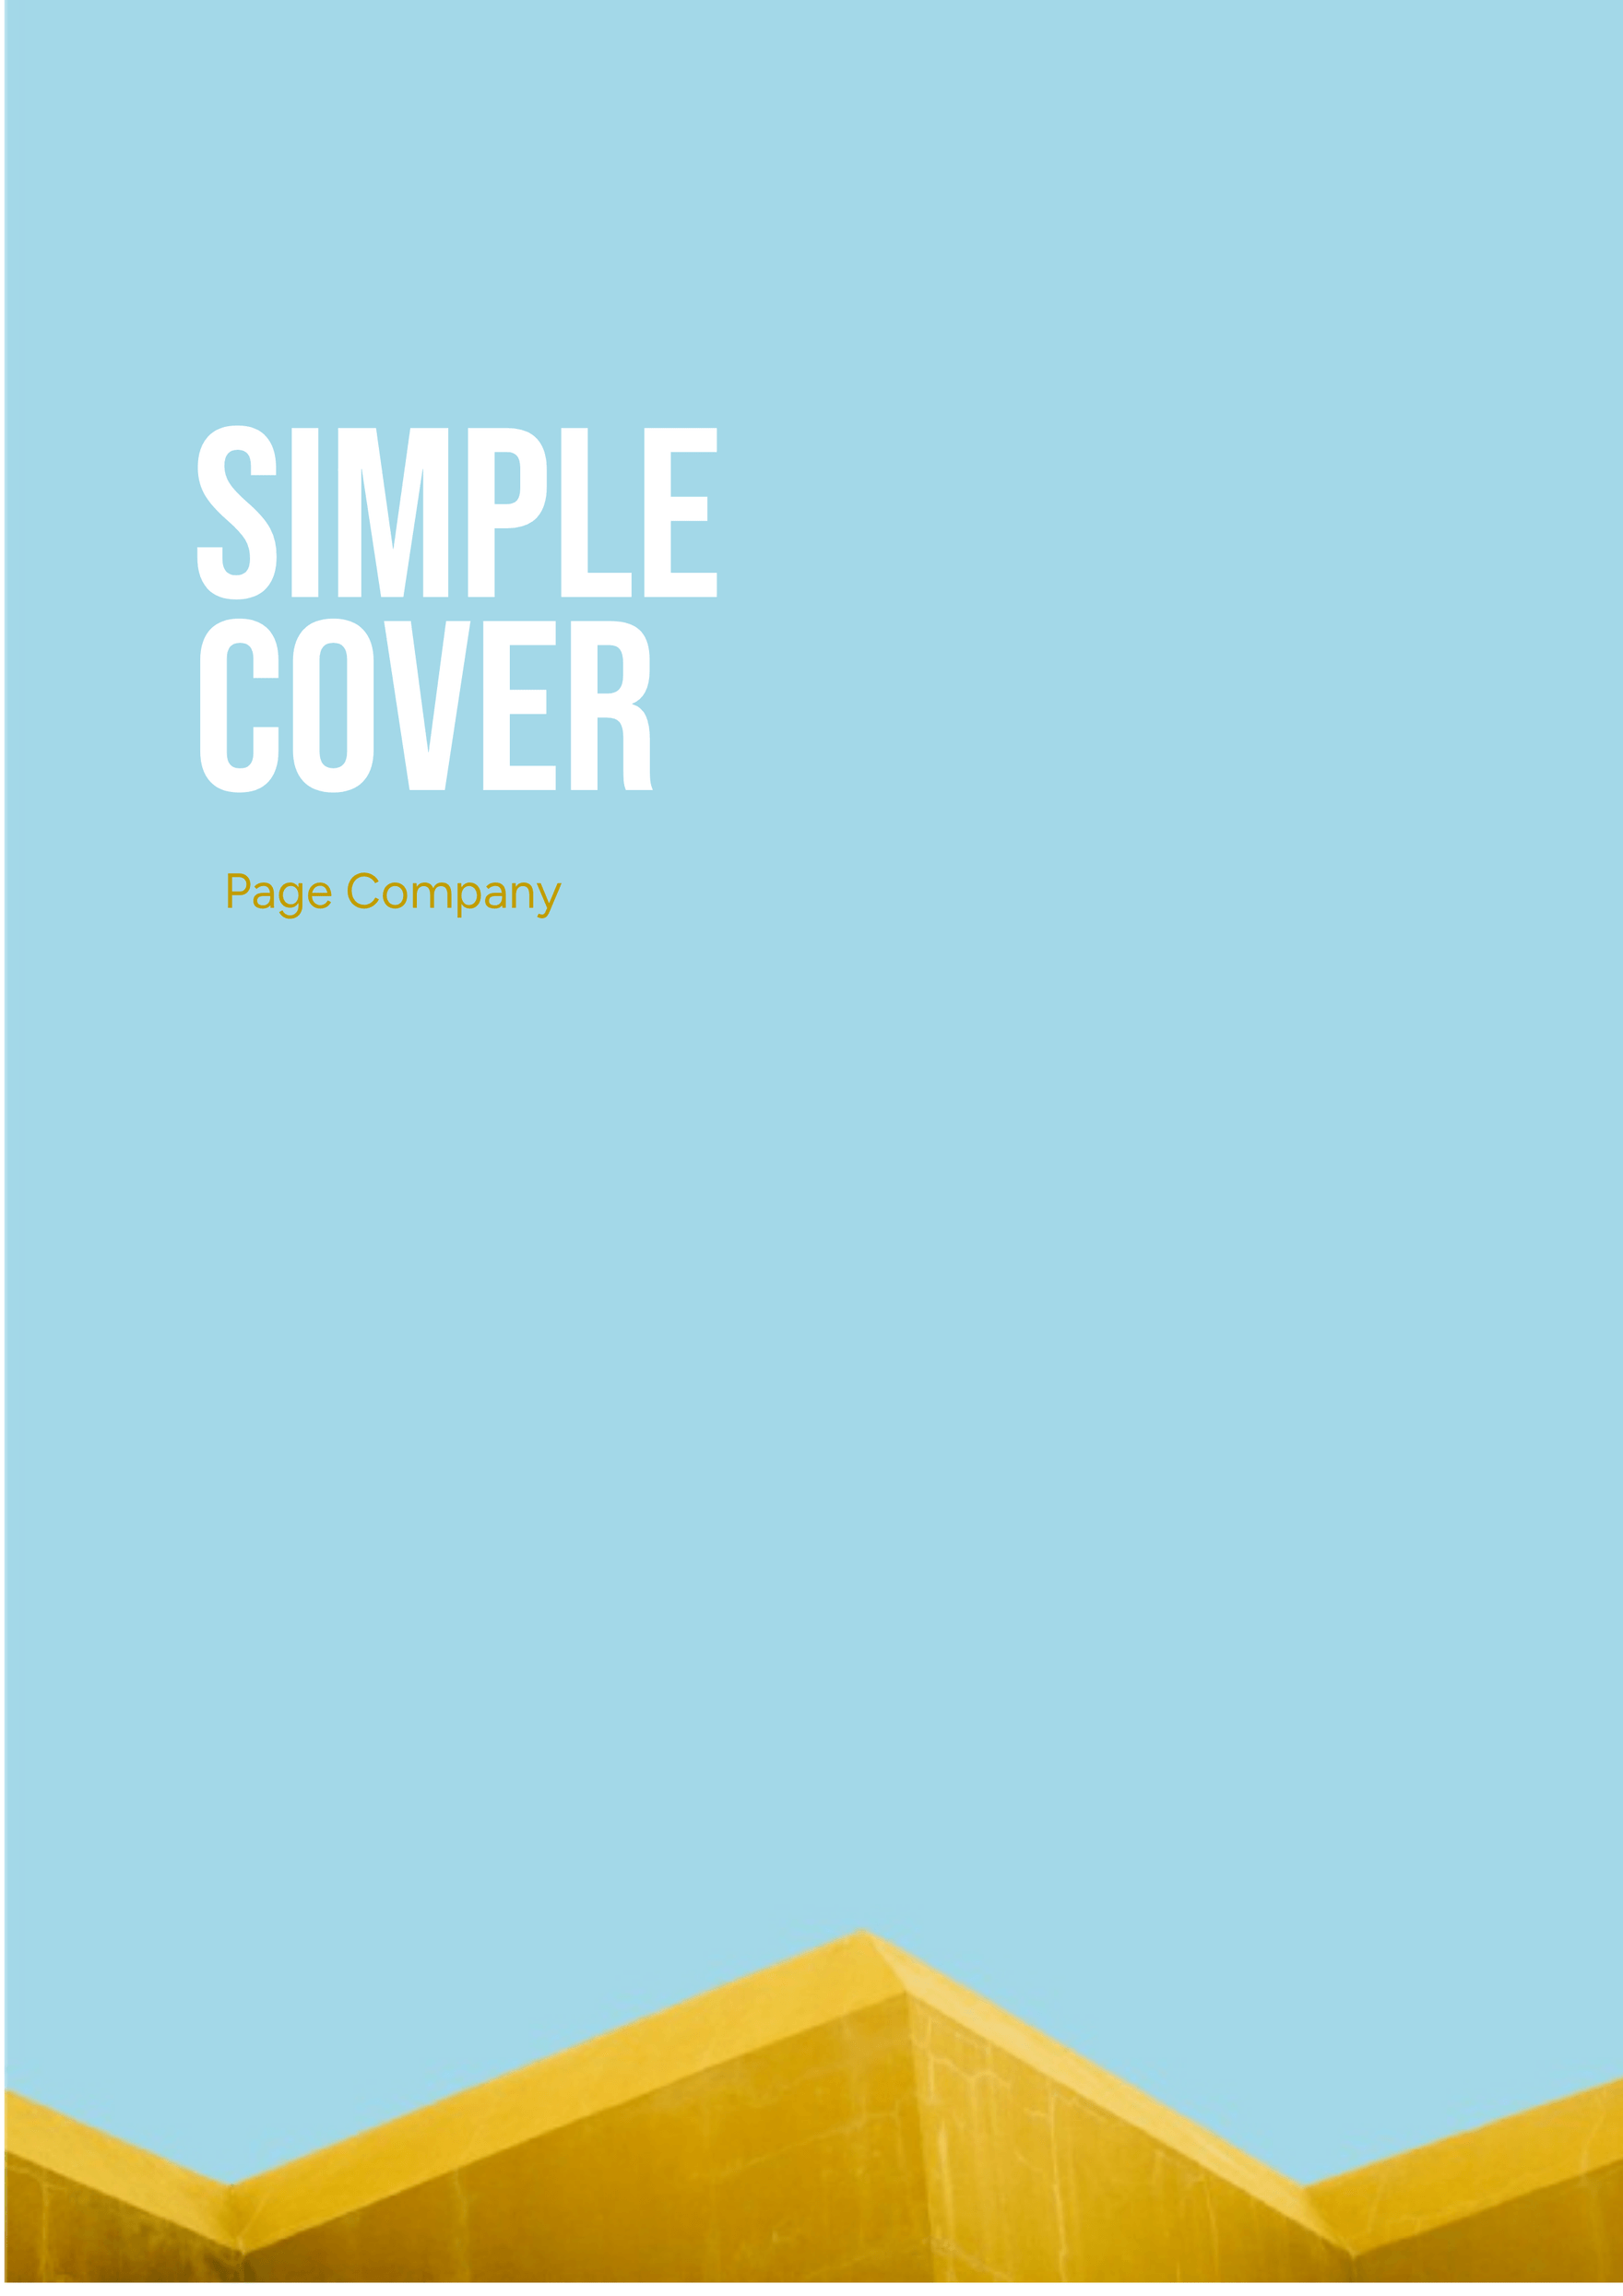 Simple Cover Page Company Template